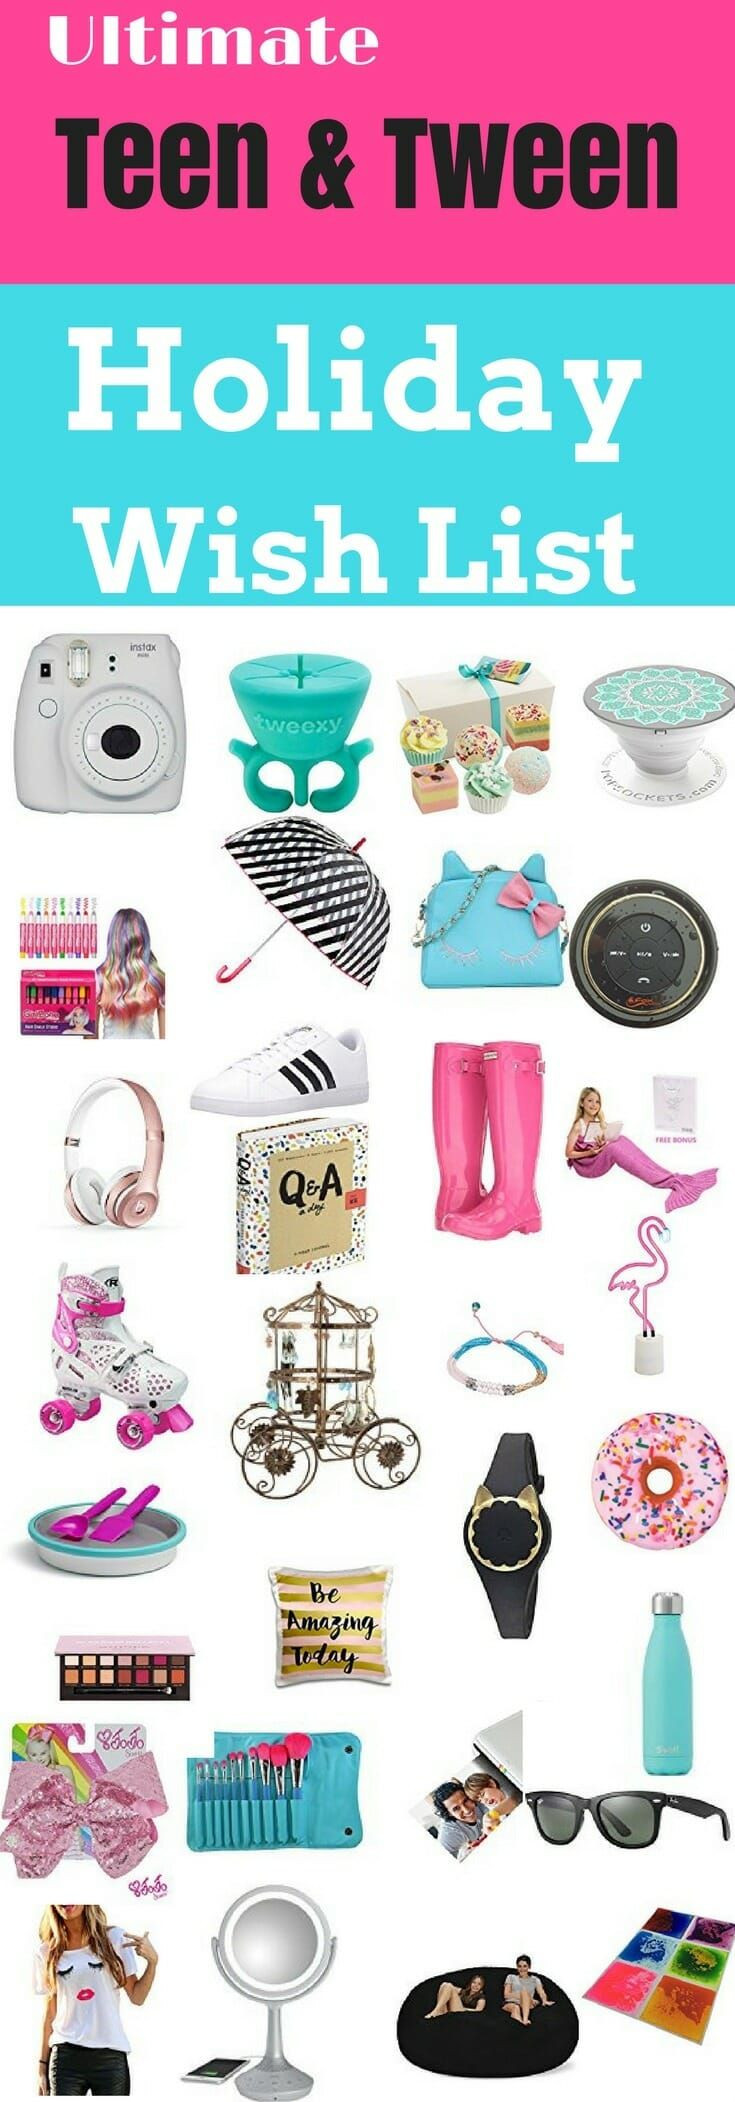 Cool Gift Ideas For Girls
 Gifts for Teenage Girls Under $20 Affordable Christmas